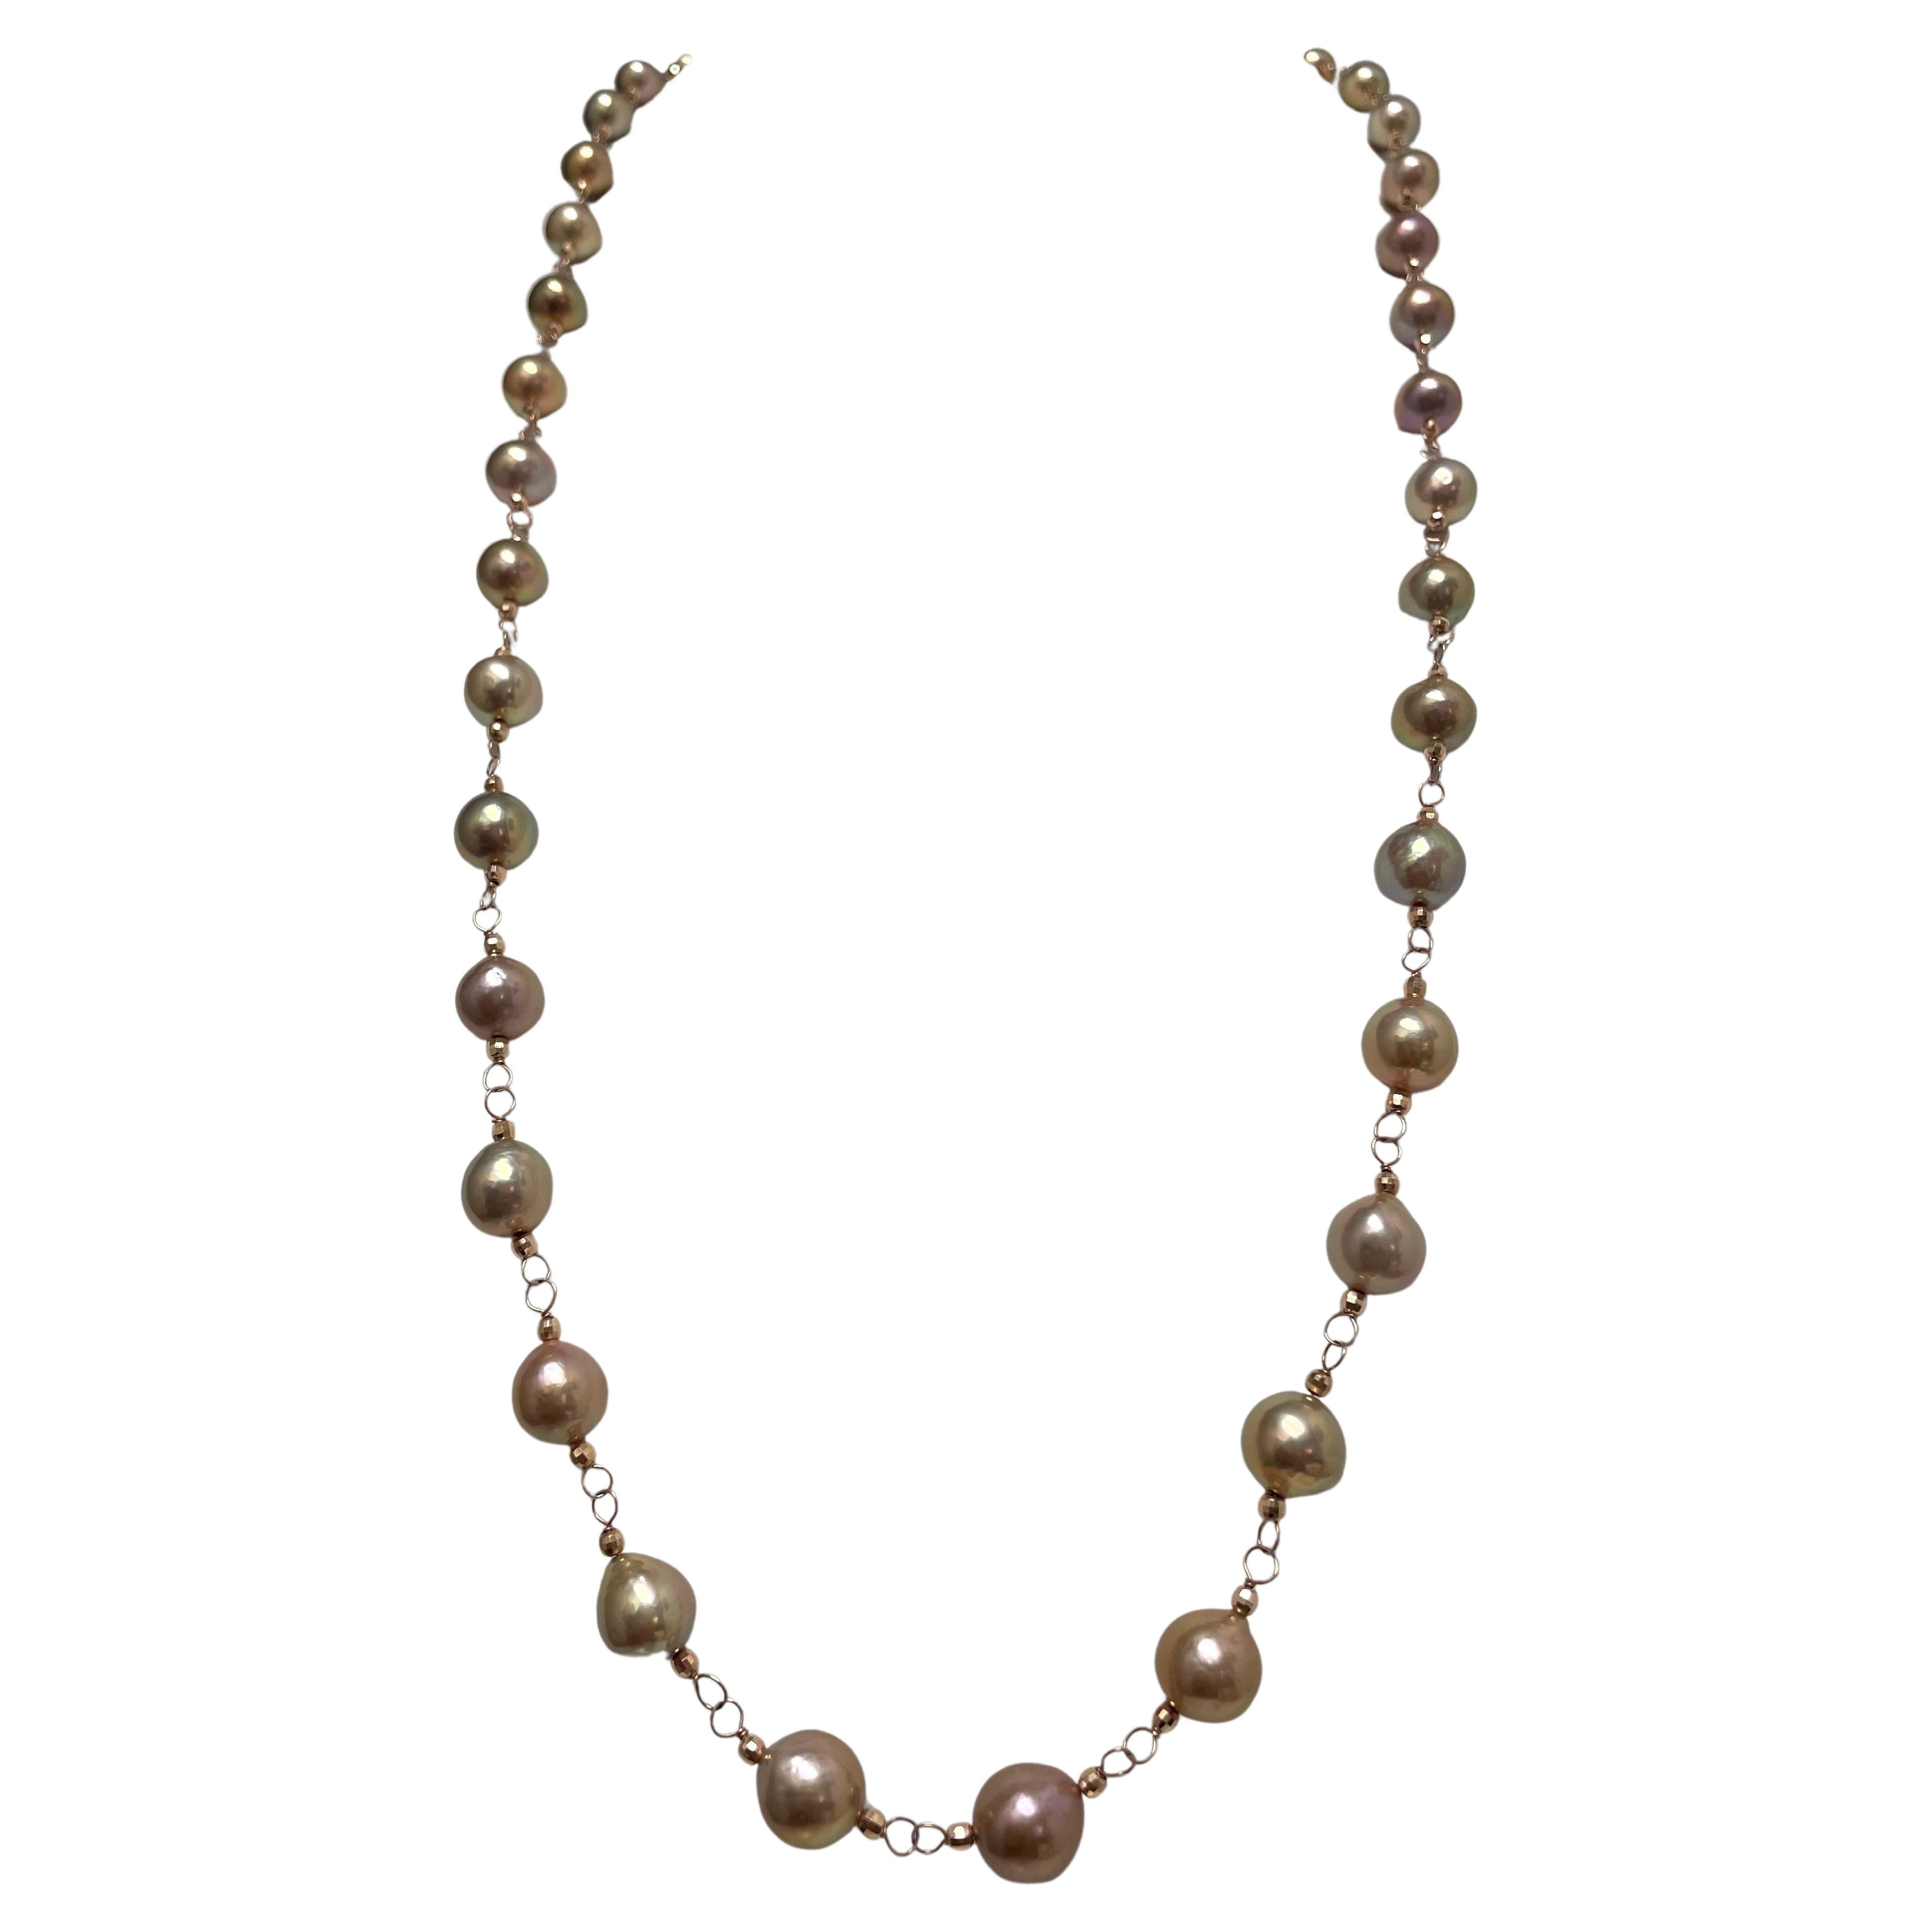 Description
Stunning, highly lustrous, rare tea rose color, round freshwater pearls accented with 14k rose gold faceted balls. Can be worn long or short as a double strand necklace. Item # N3789. 

Materials and Weight
Freshwater nucleated pearls,